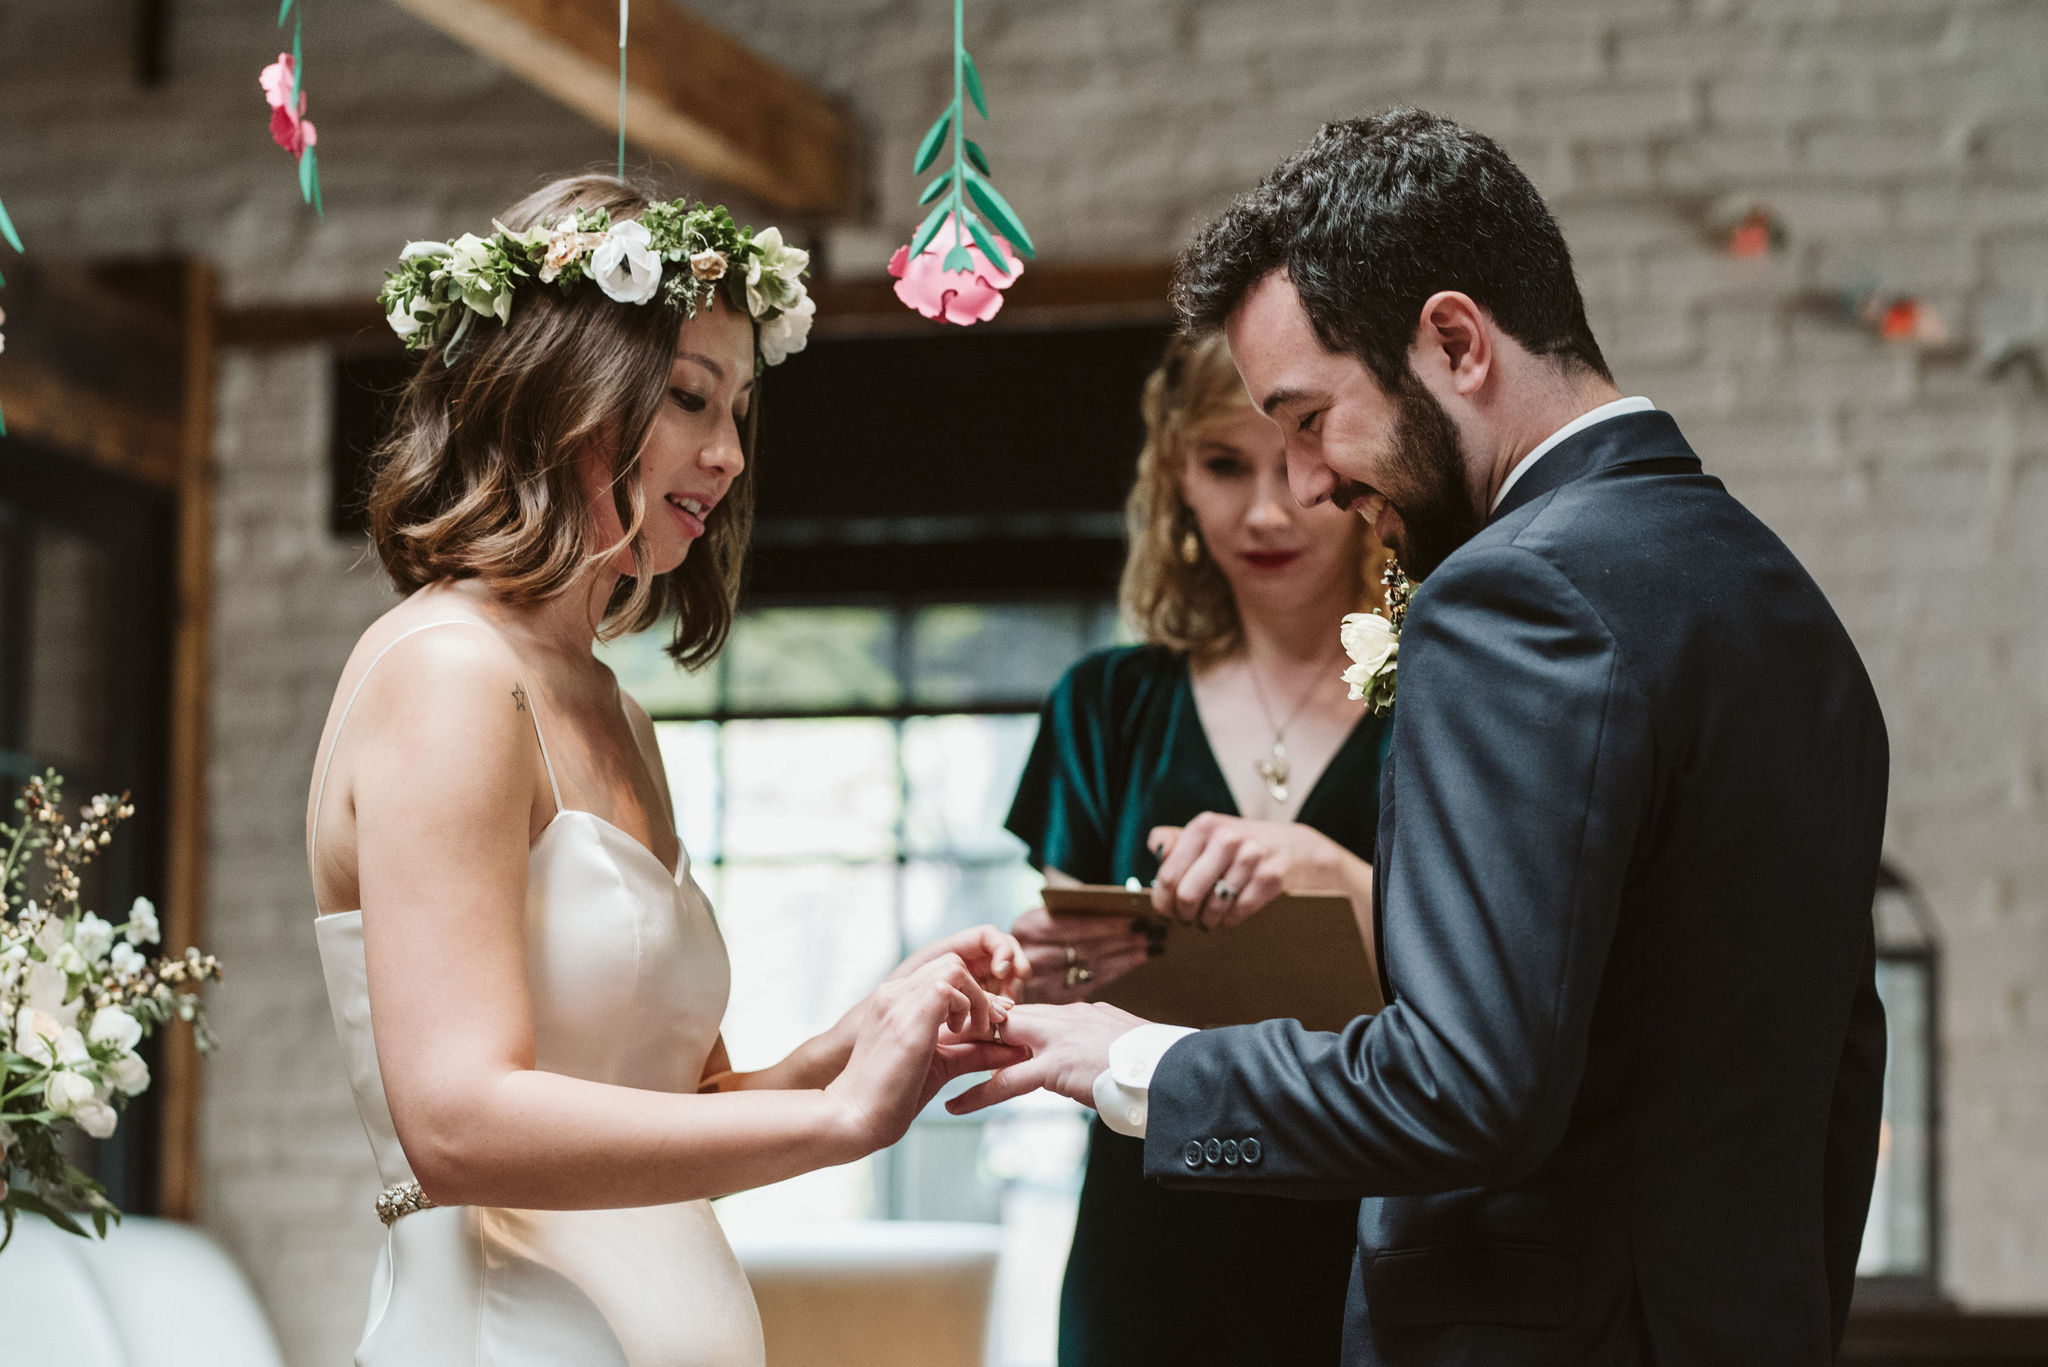  Washington DC, Baltimore Wedding Photographer, Alexandria, Old Town, Jewel Tone, Romantic, Modern, Virtue Feed &amp; Grain, Bride and Groom Exchanging Rings at Ceremony 